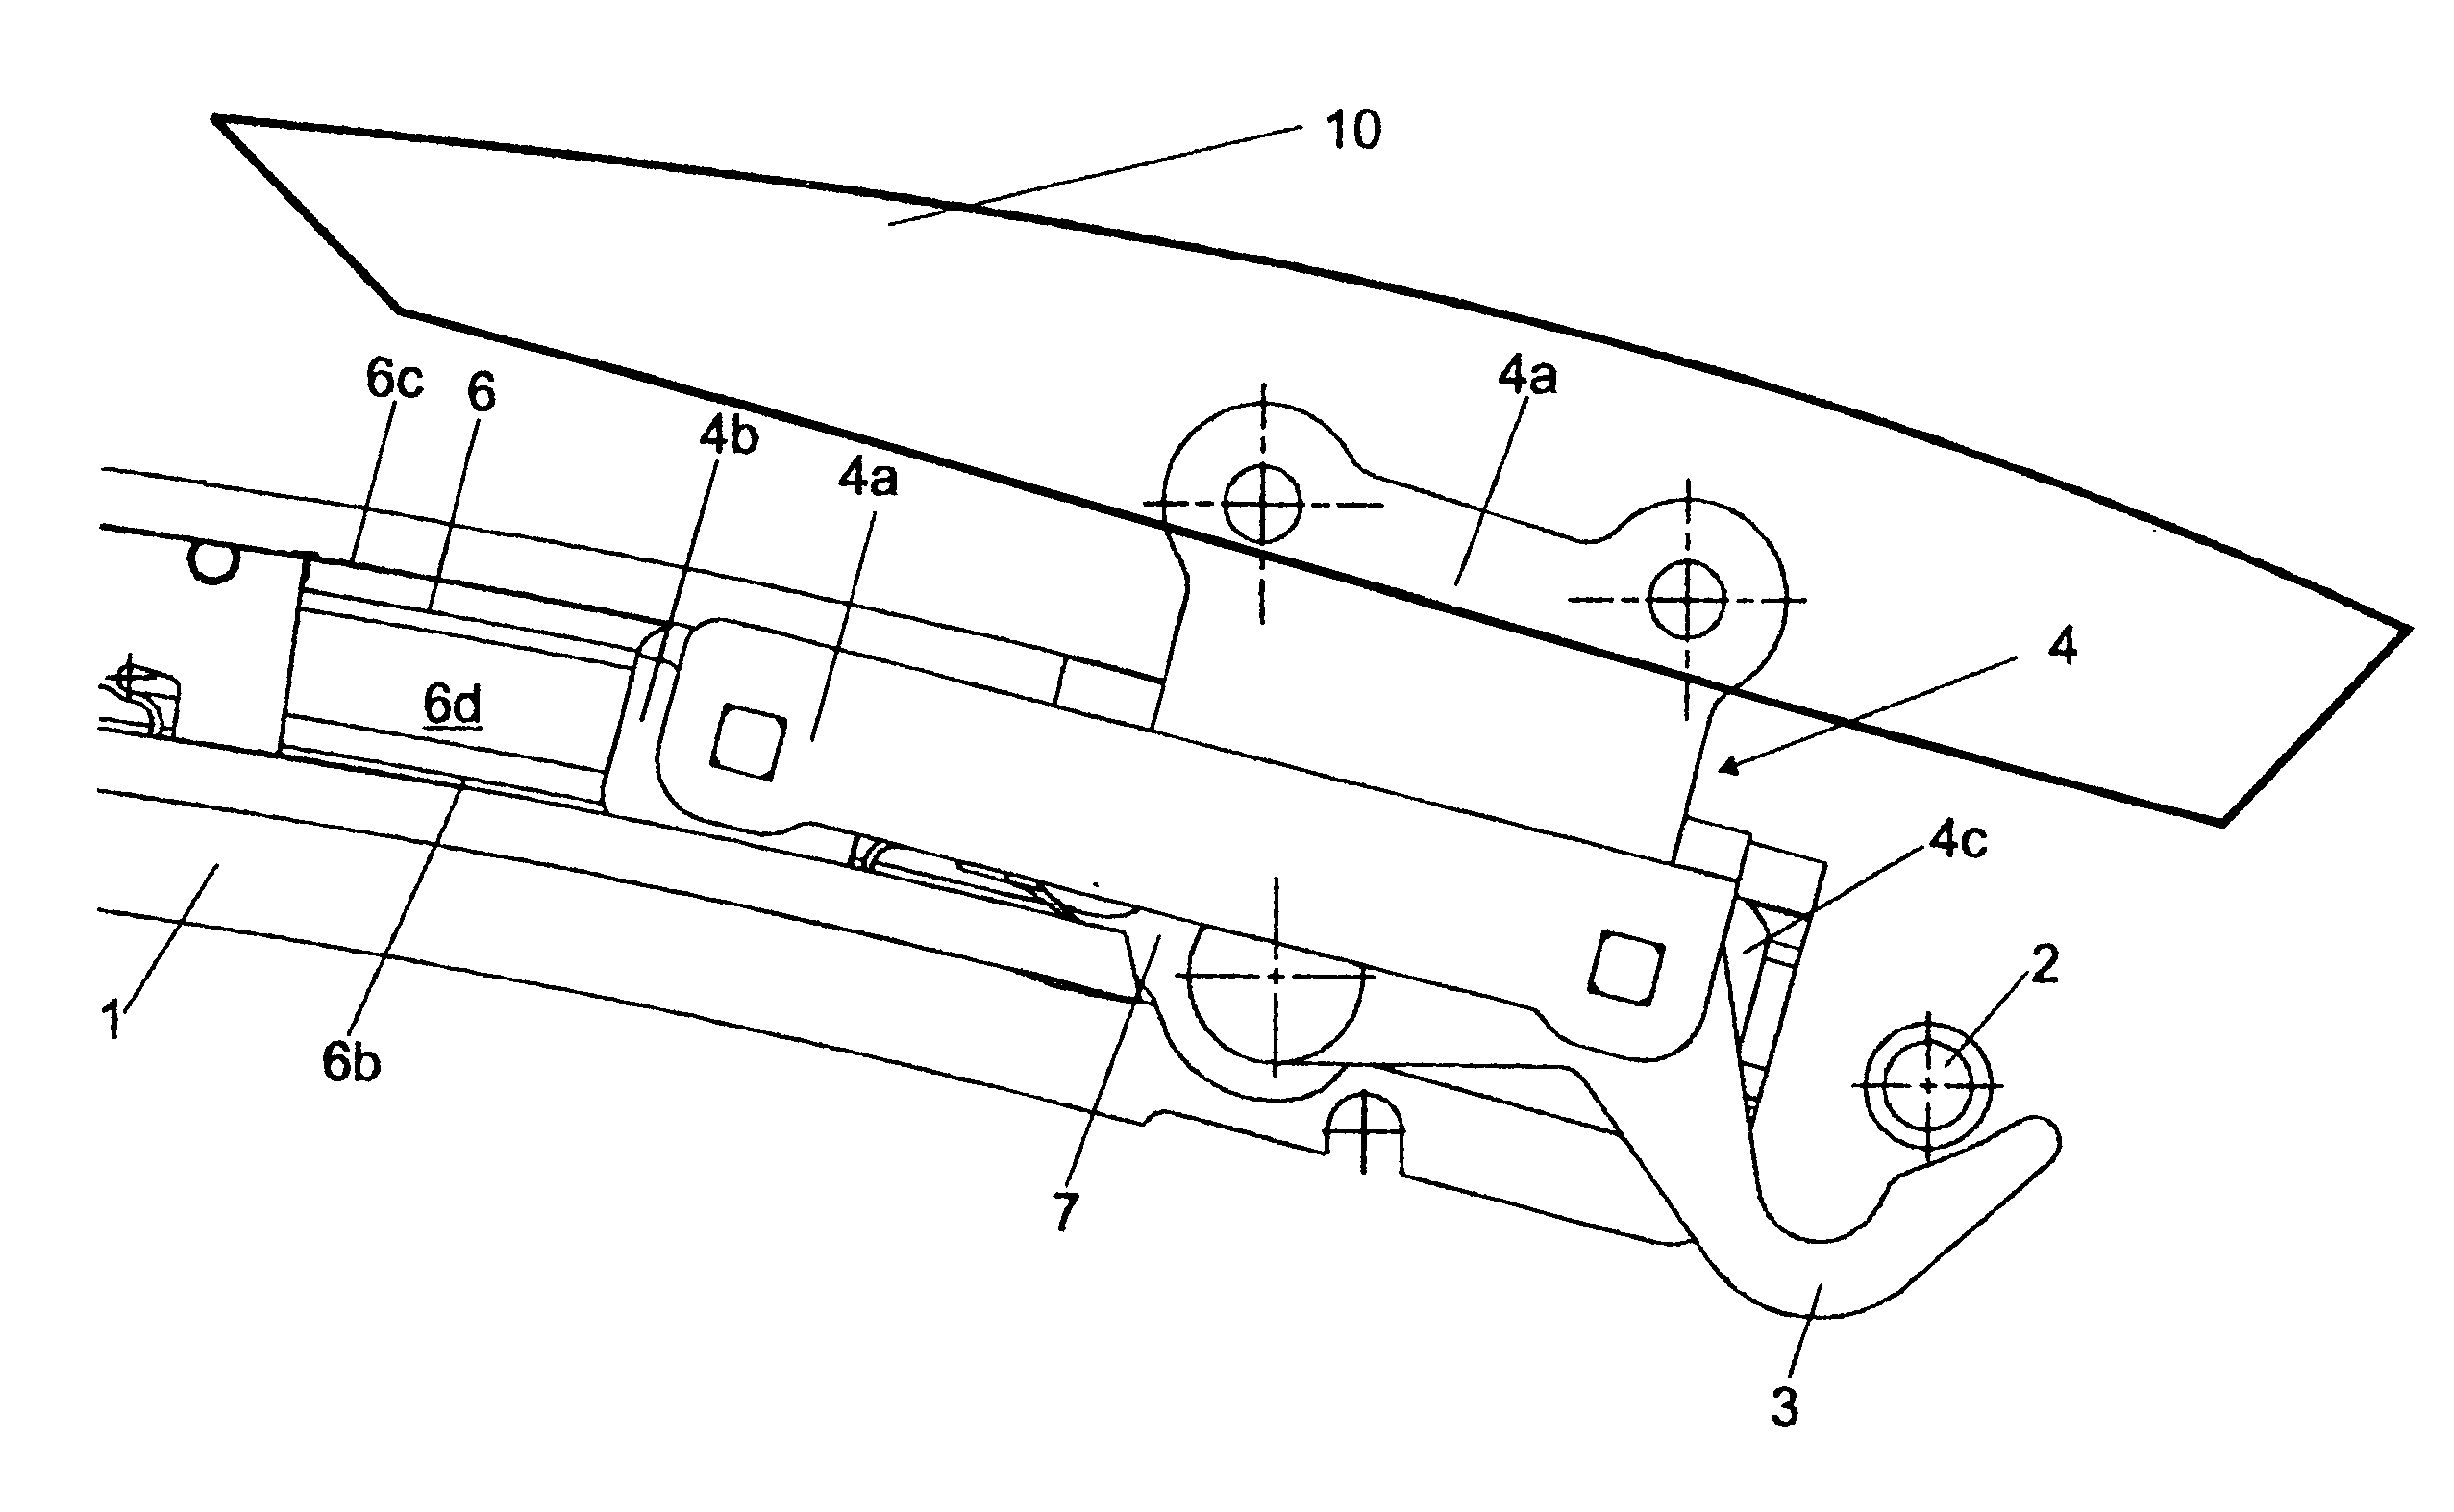 Closure device for a convertible top